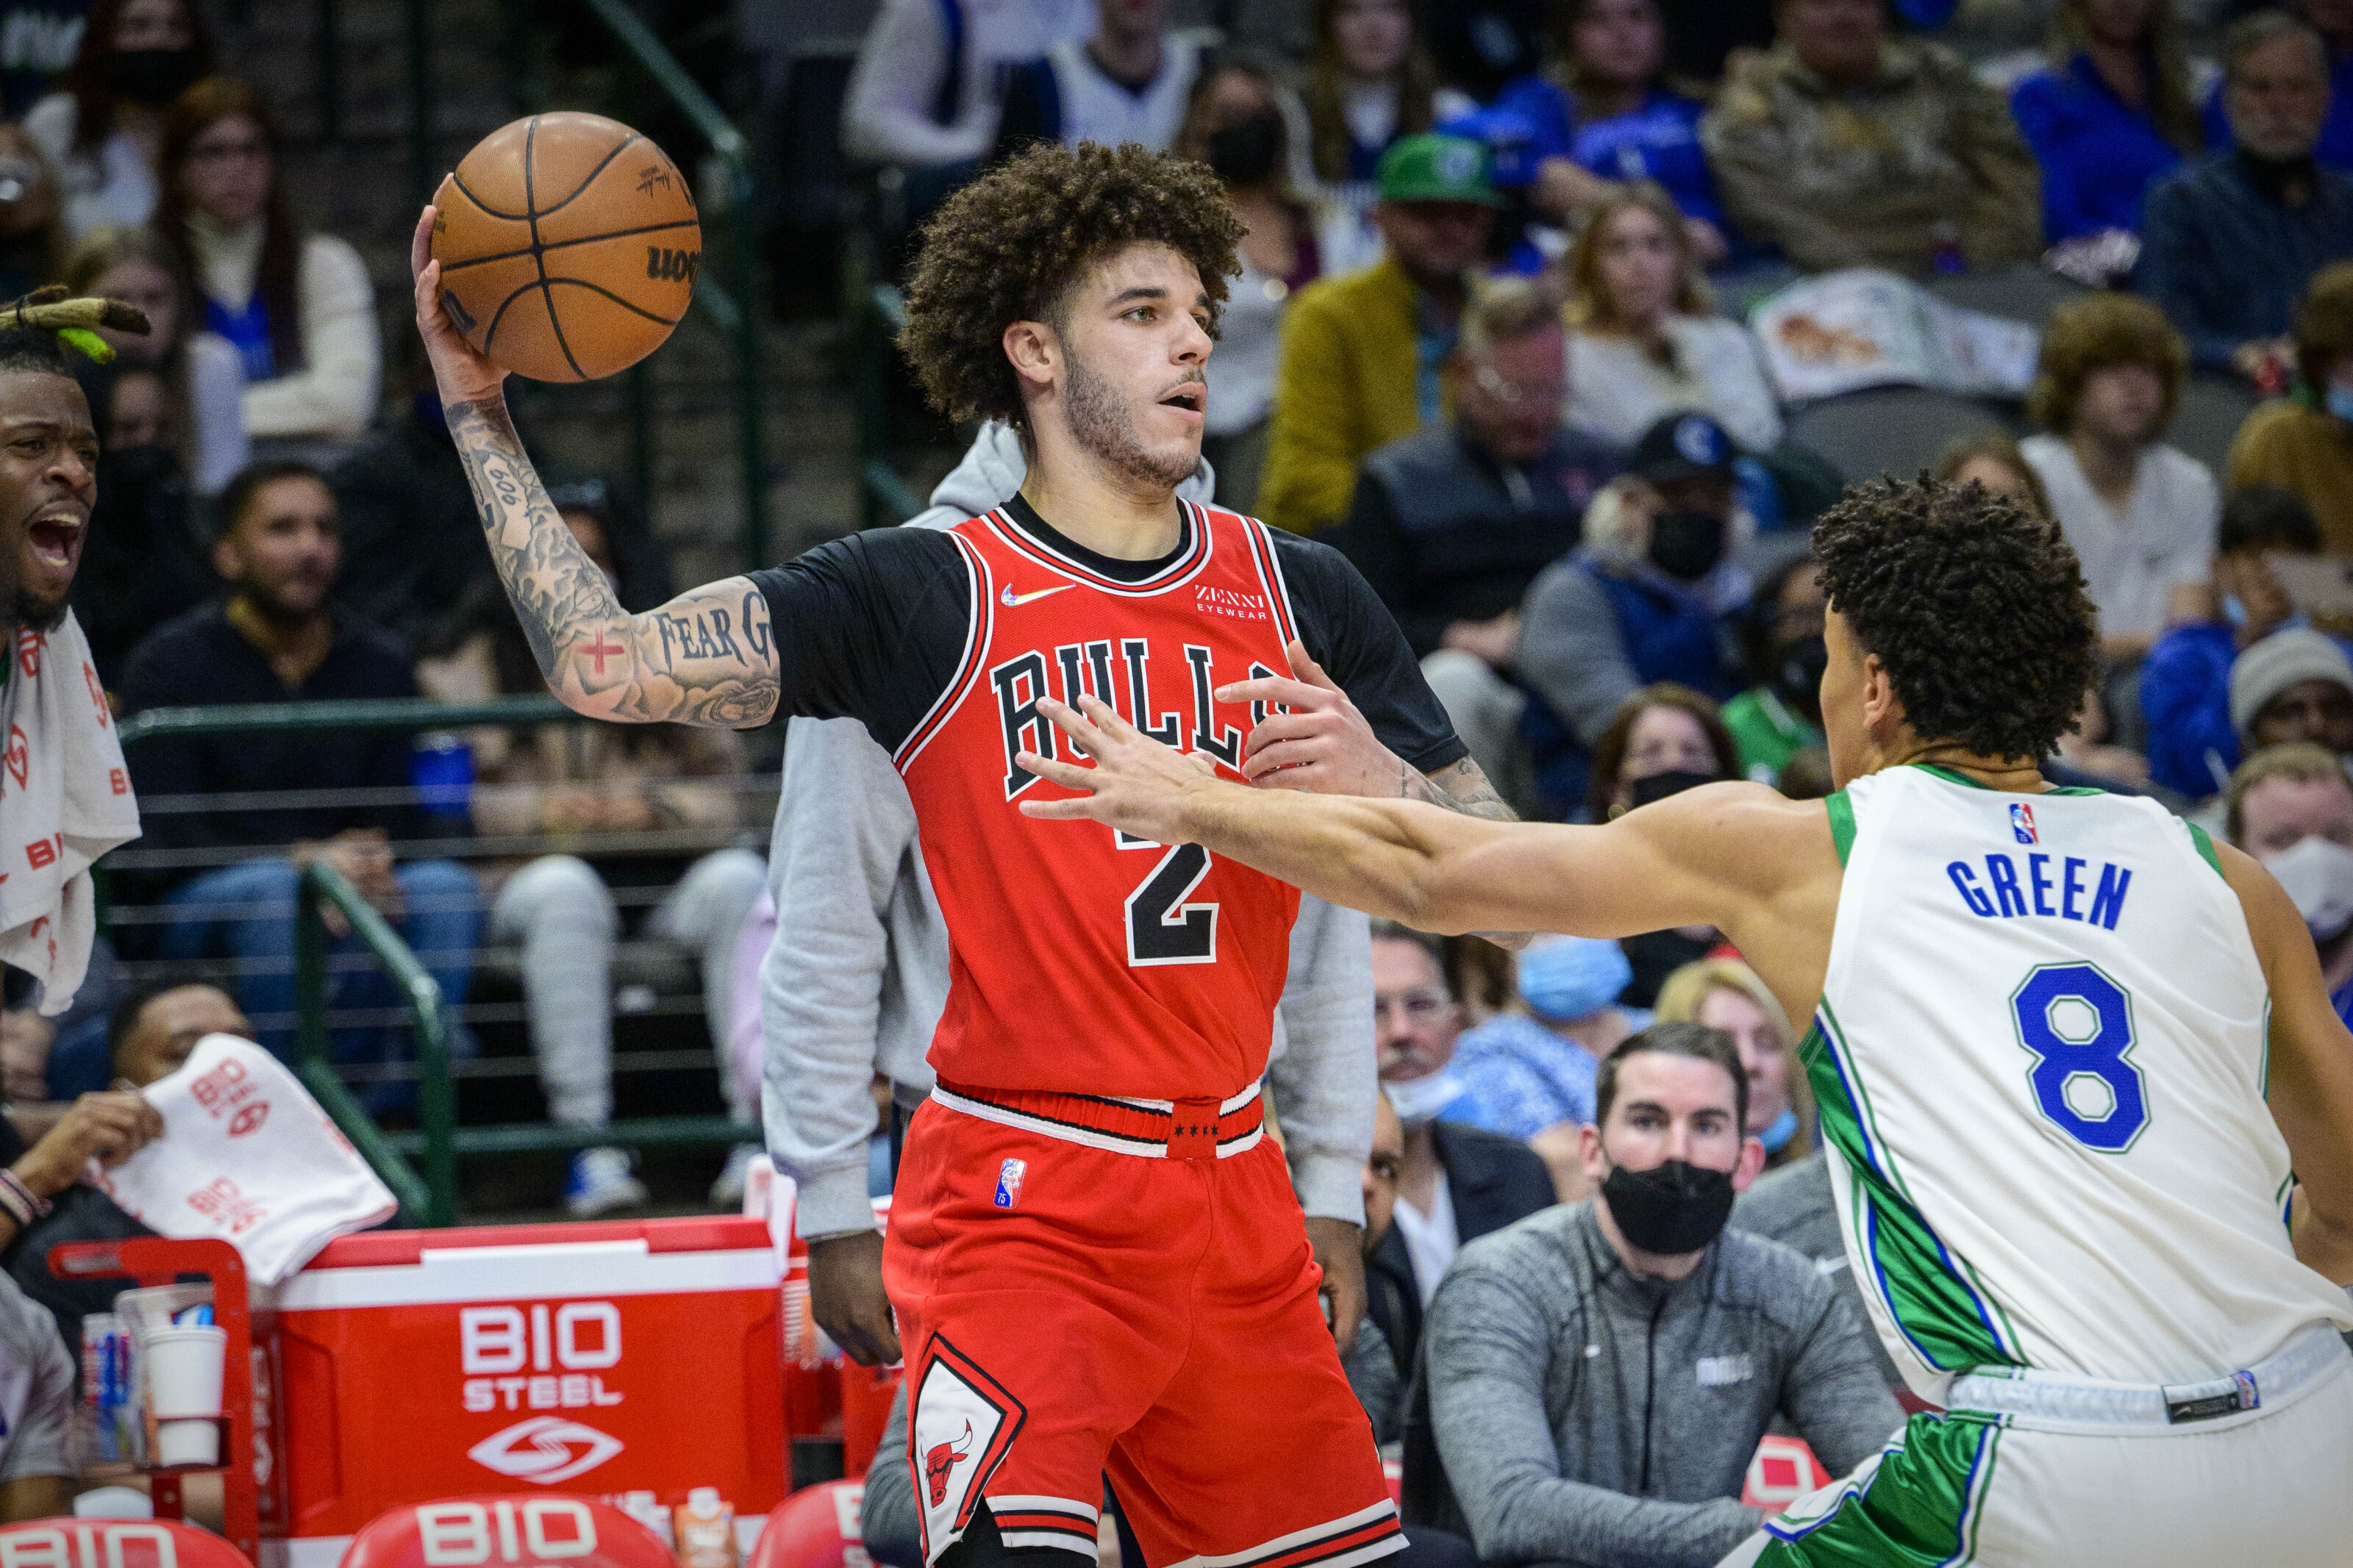 The Athletic dubs Lonzo Ball with most to prove for Bulls in 2022-23